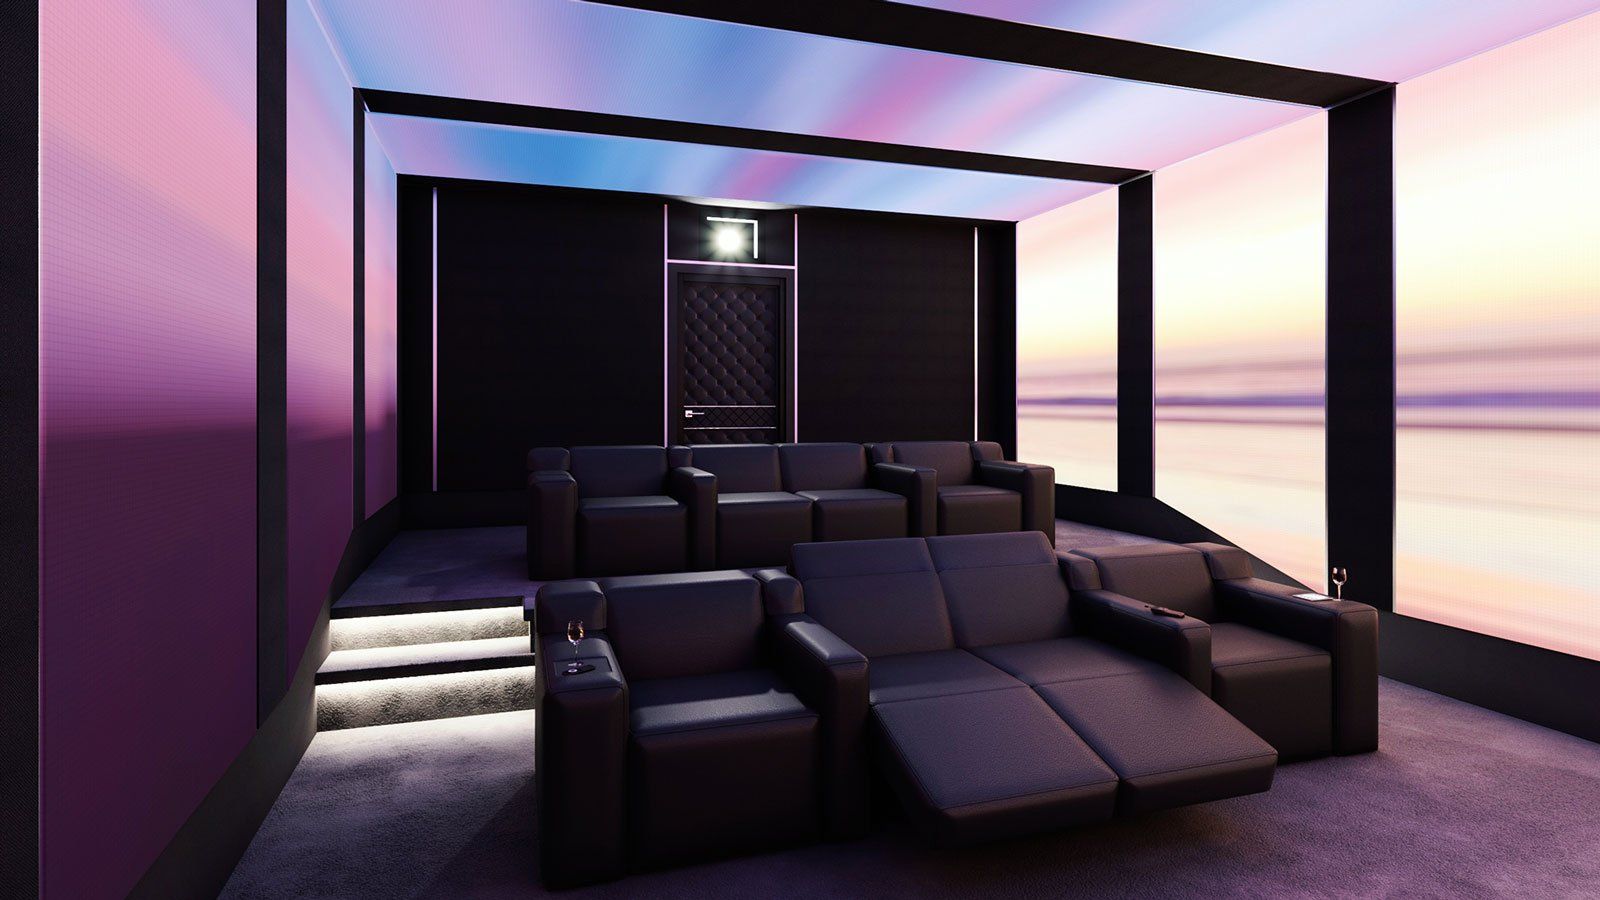 A rendering of a home theater with a couch and chairs